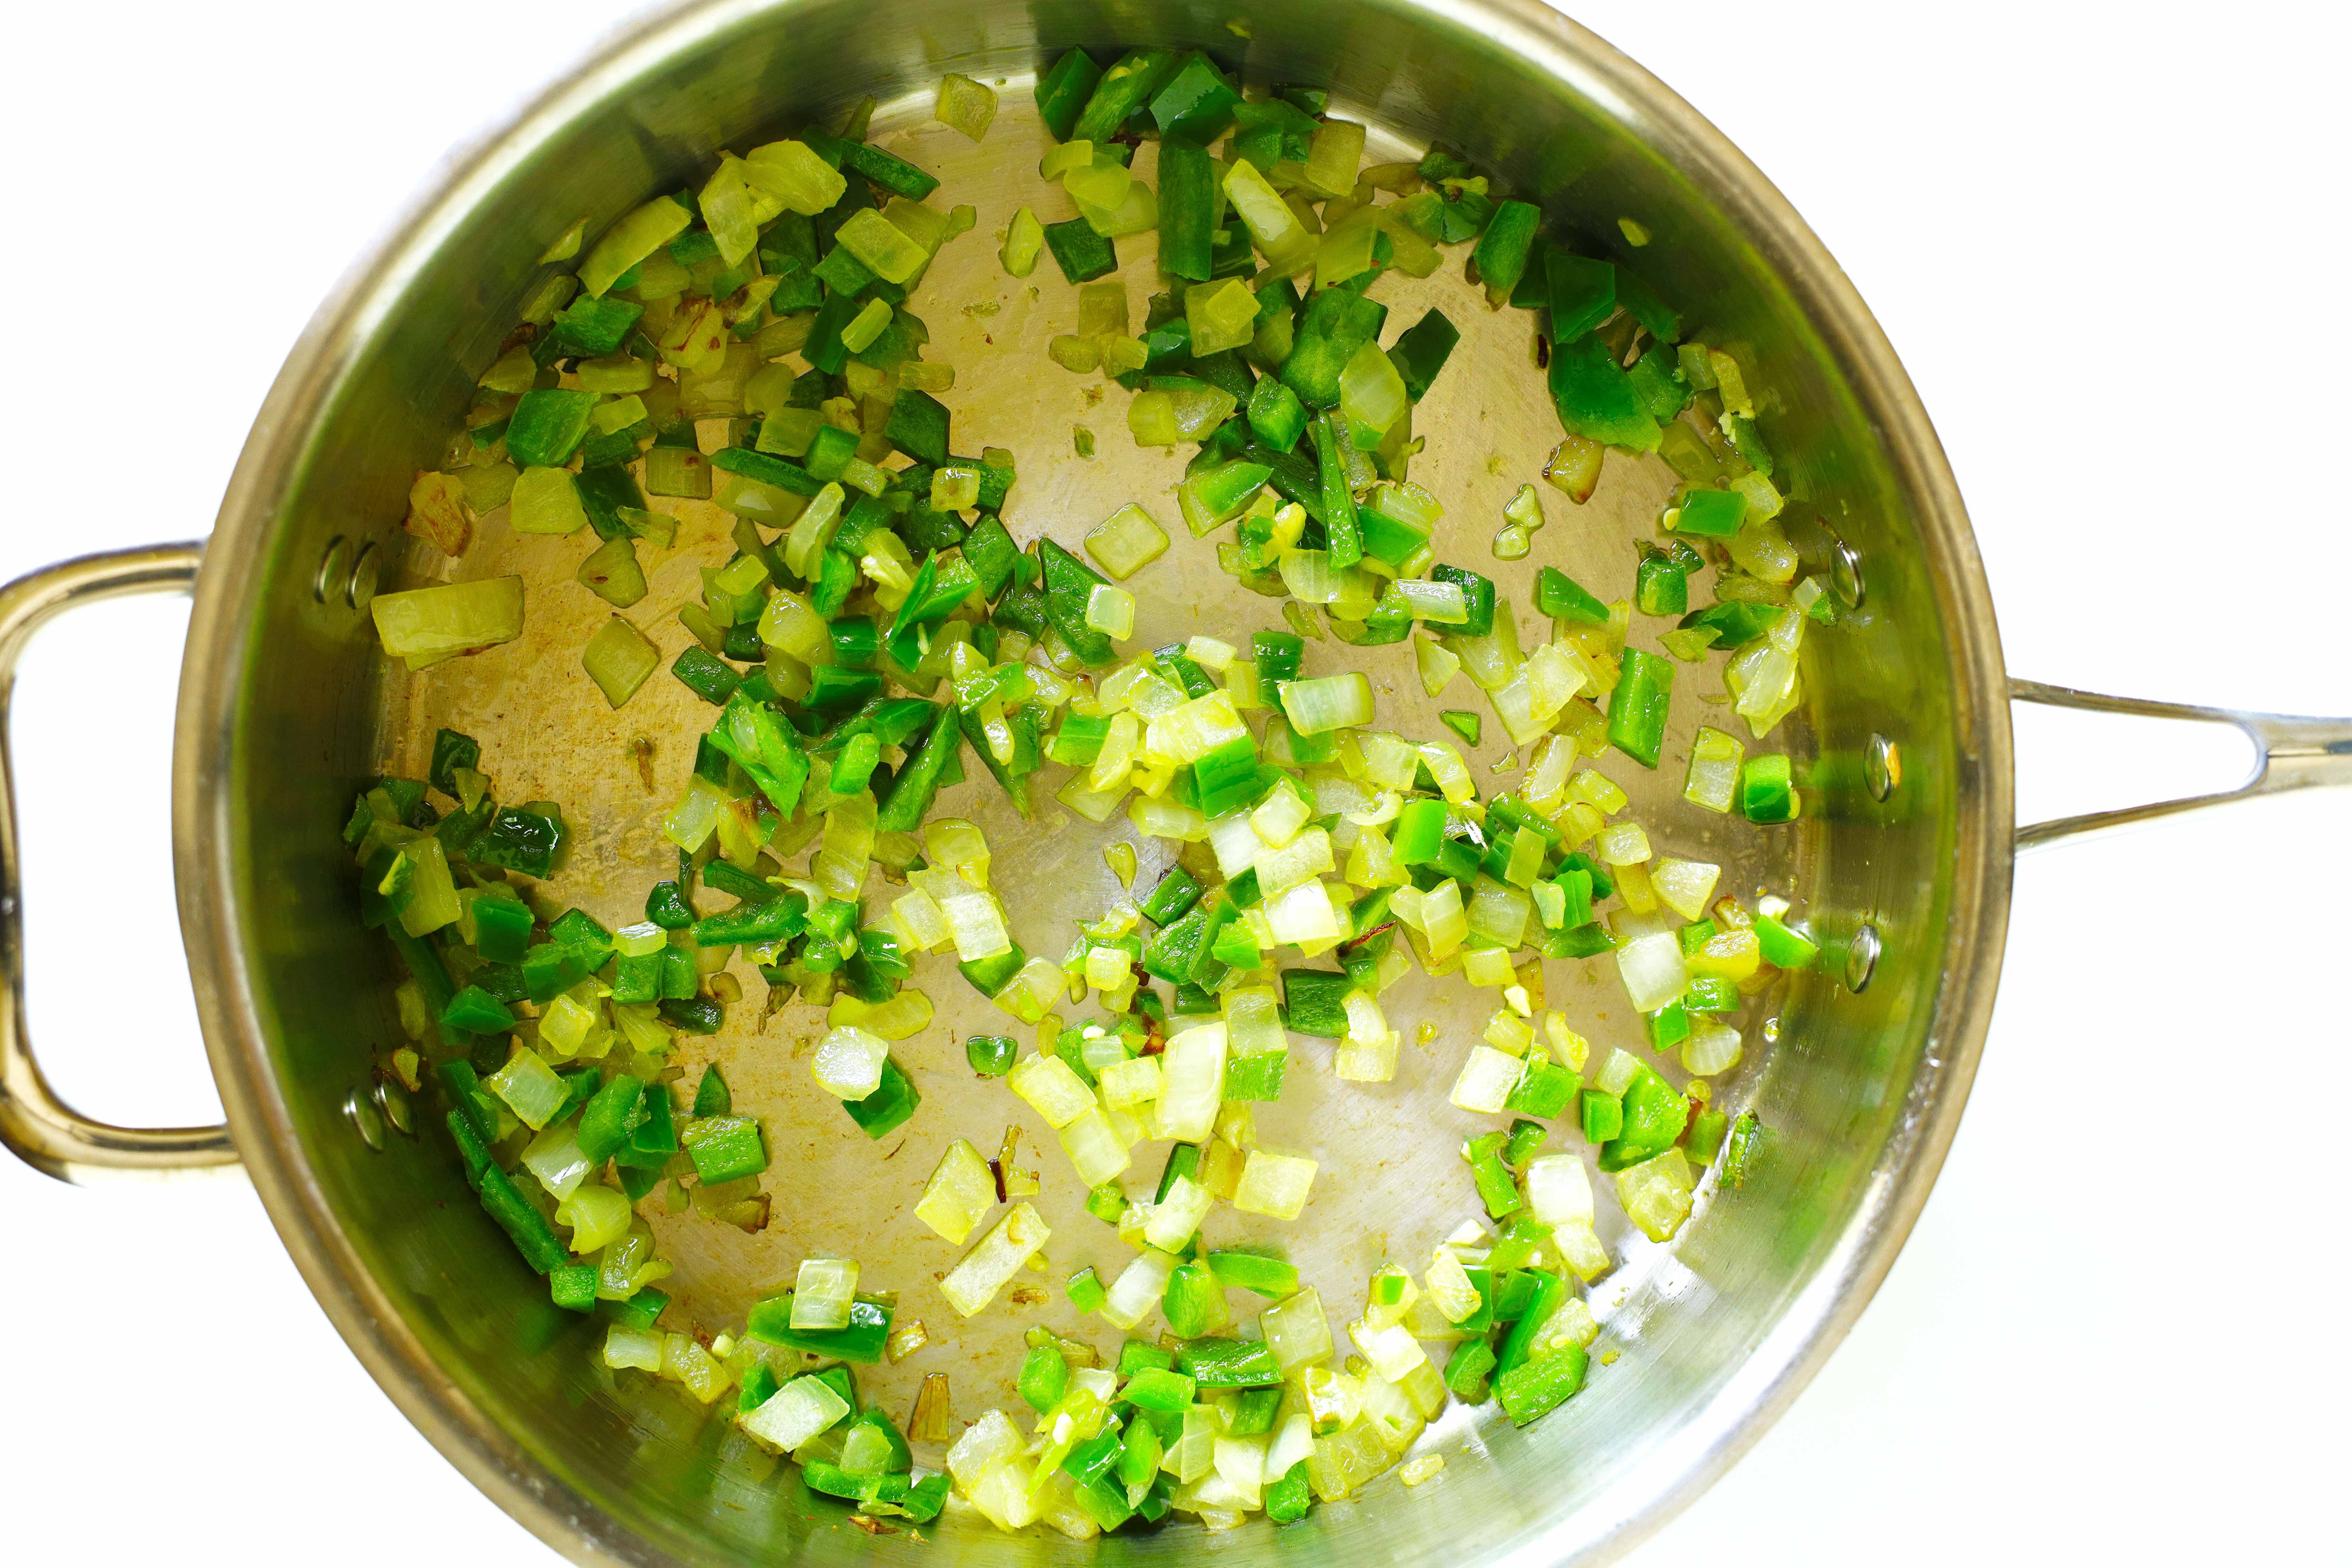 Diced onion and jalapeño cooking in a skillet.